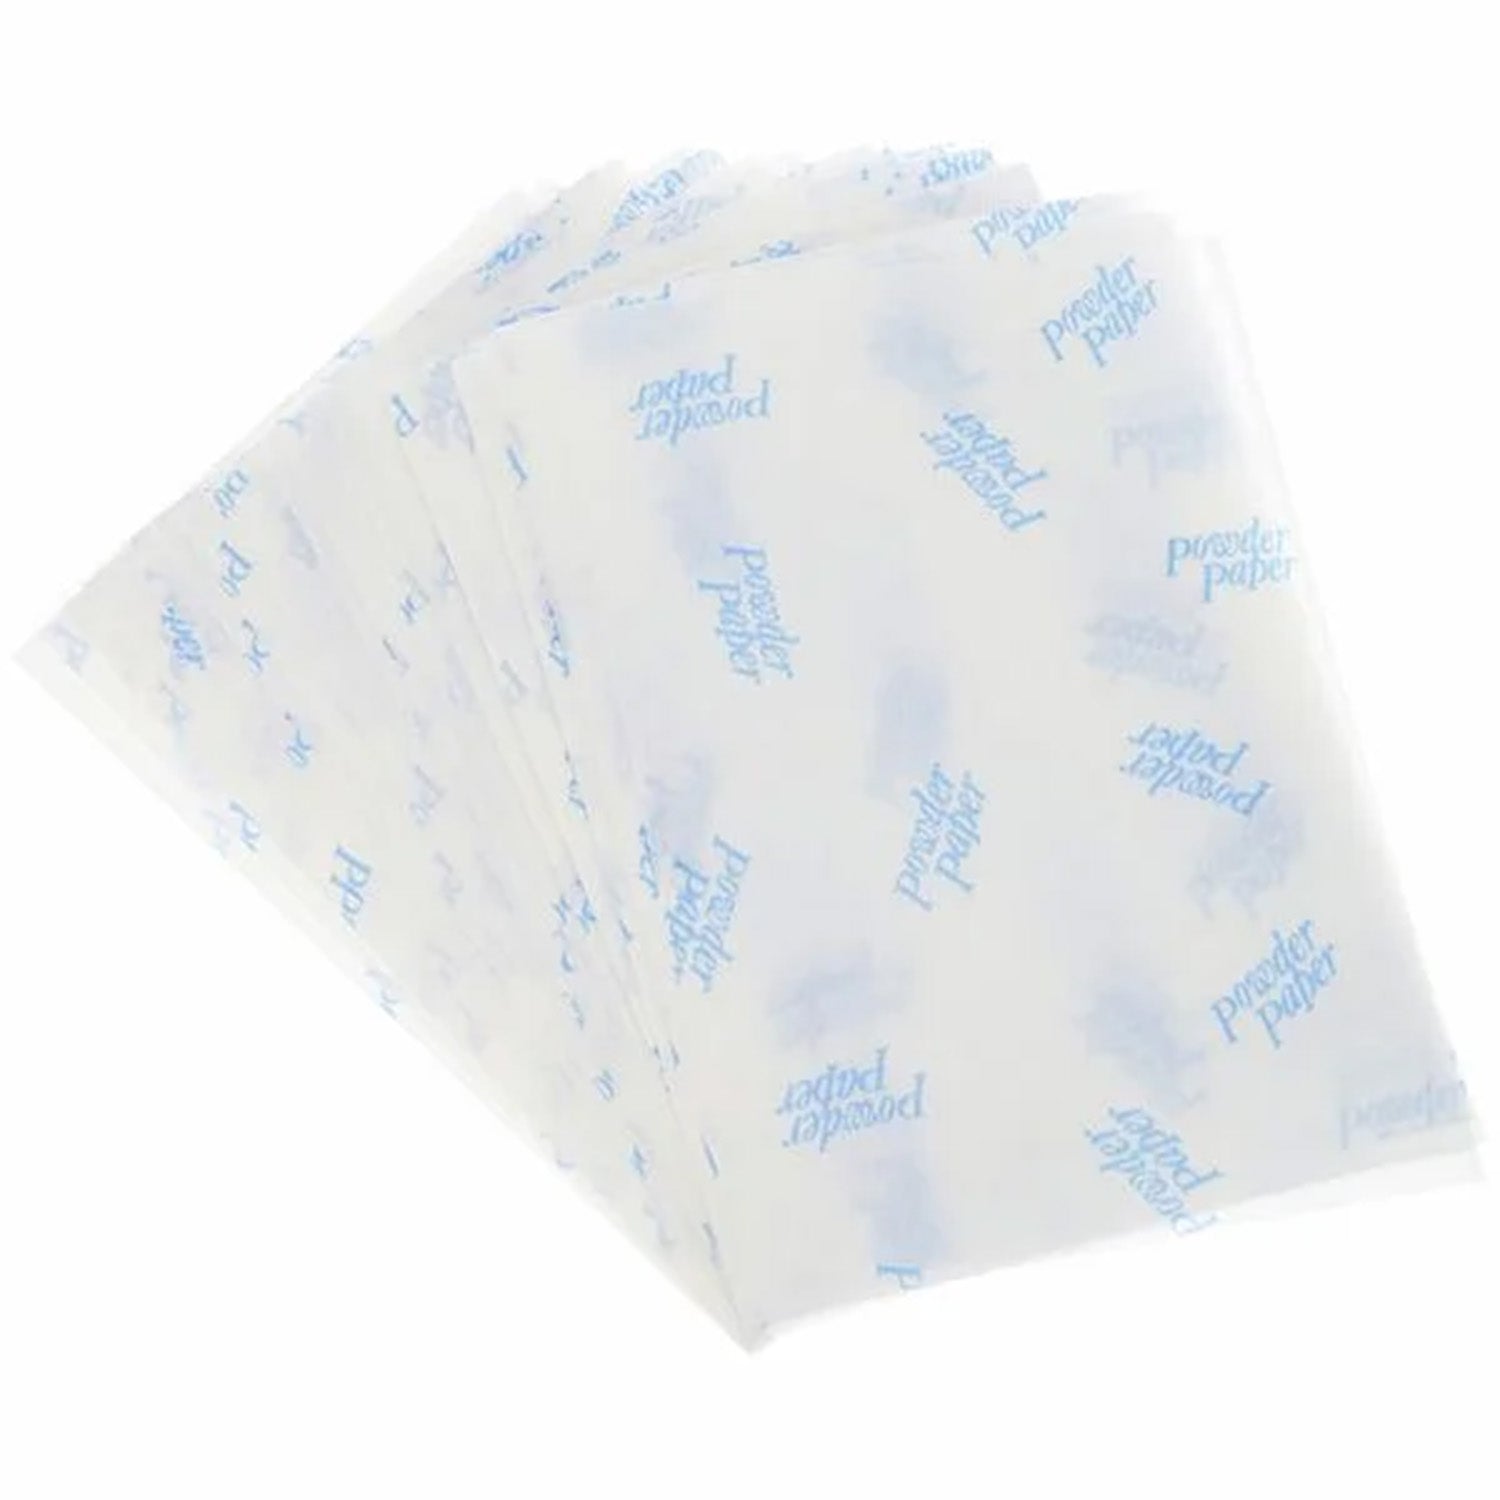 Stack of Yamaha powder papers on a white background, showing light blue lettering on papers